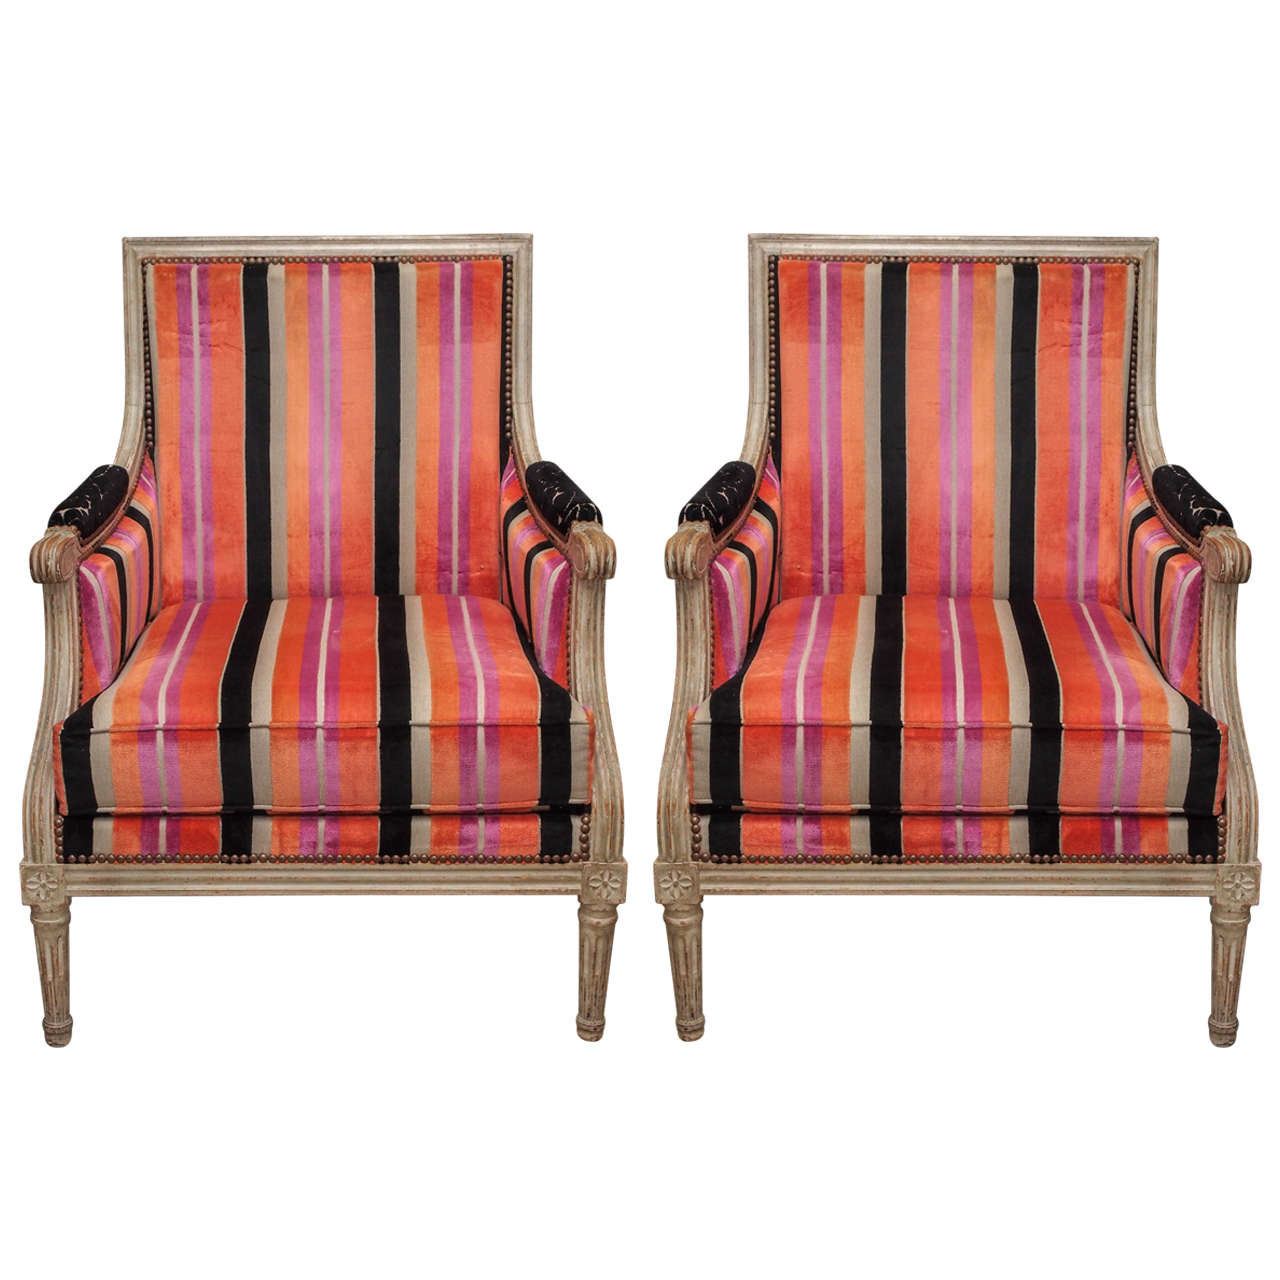 Pair of Louis XVI-Style Bergeres with Vibrant Velvet Upholstery